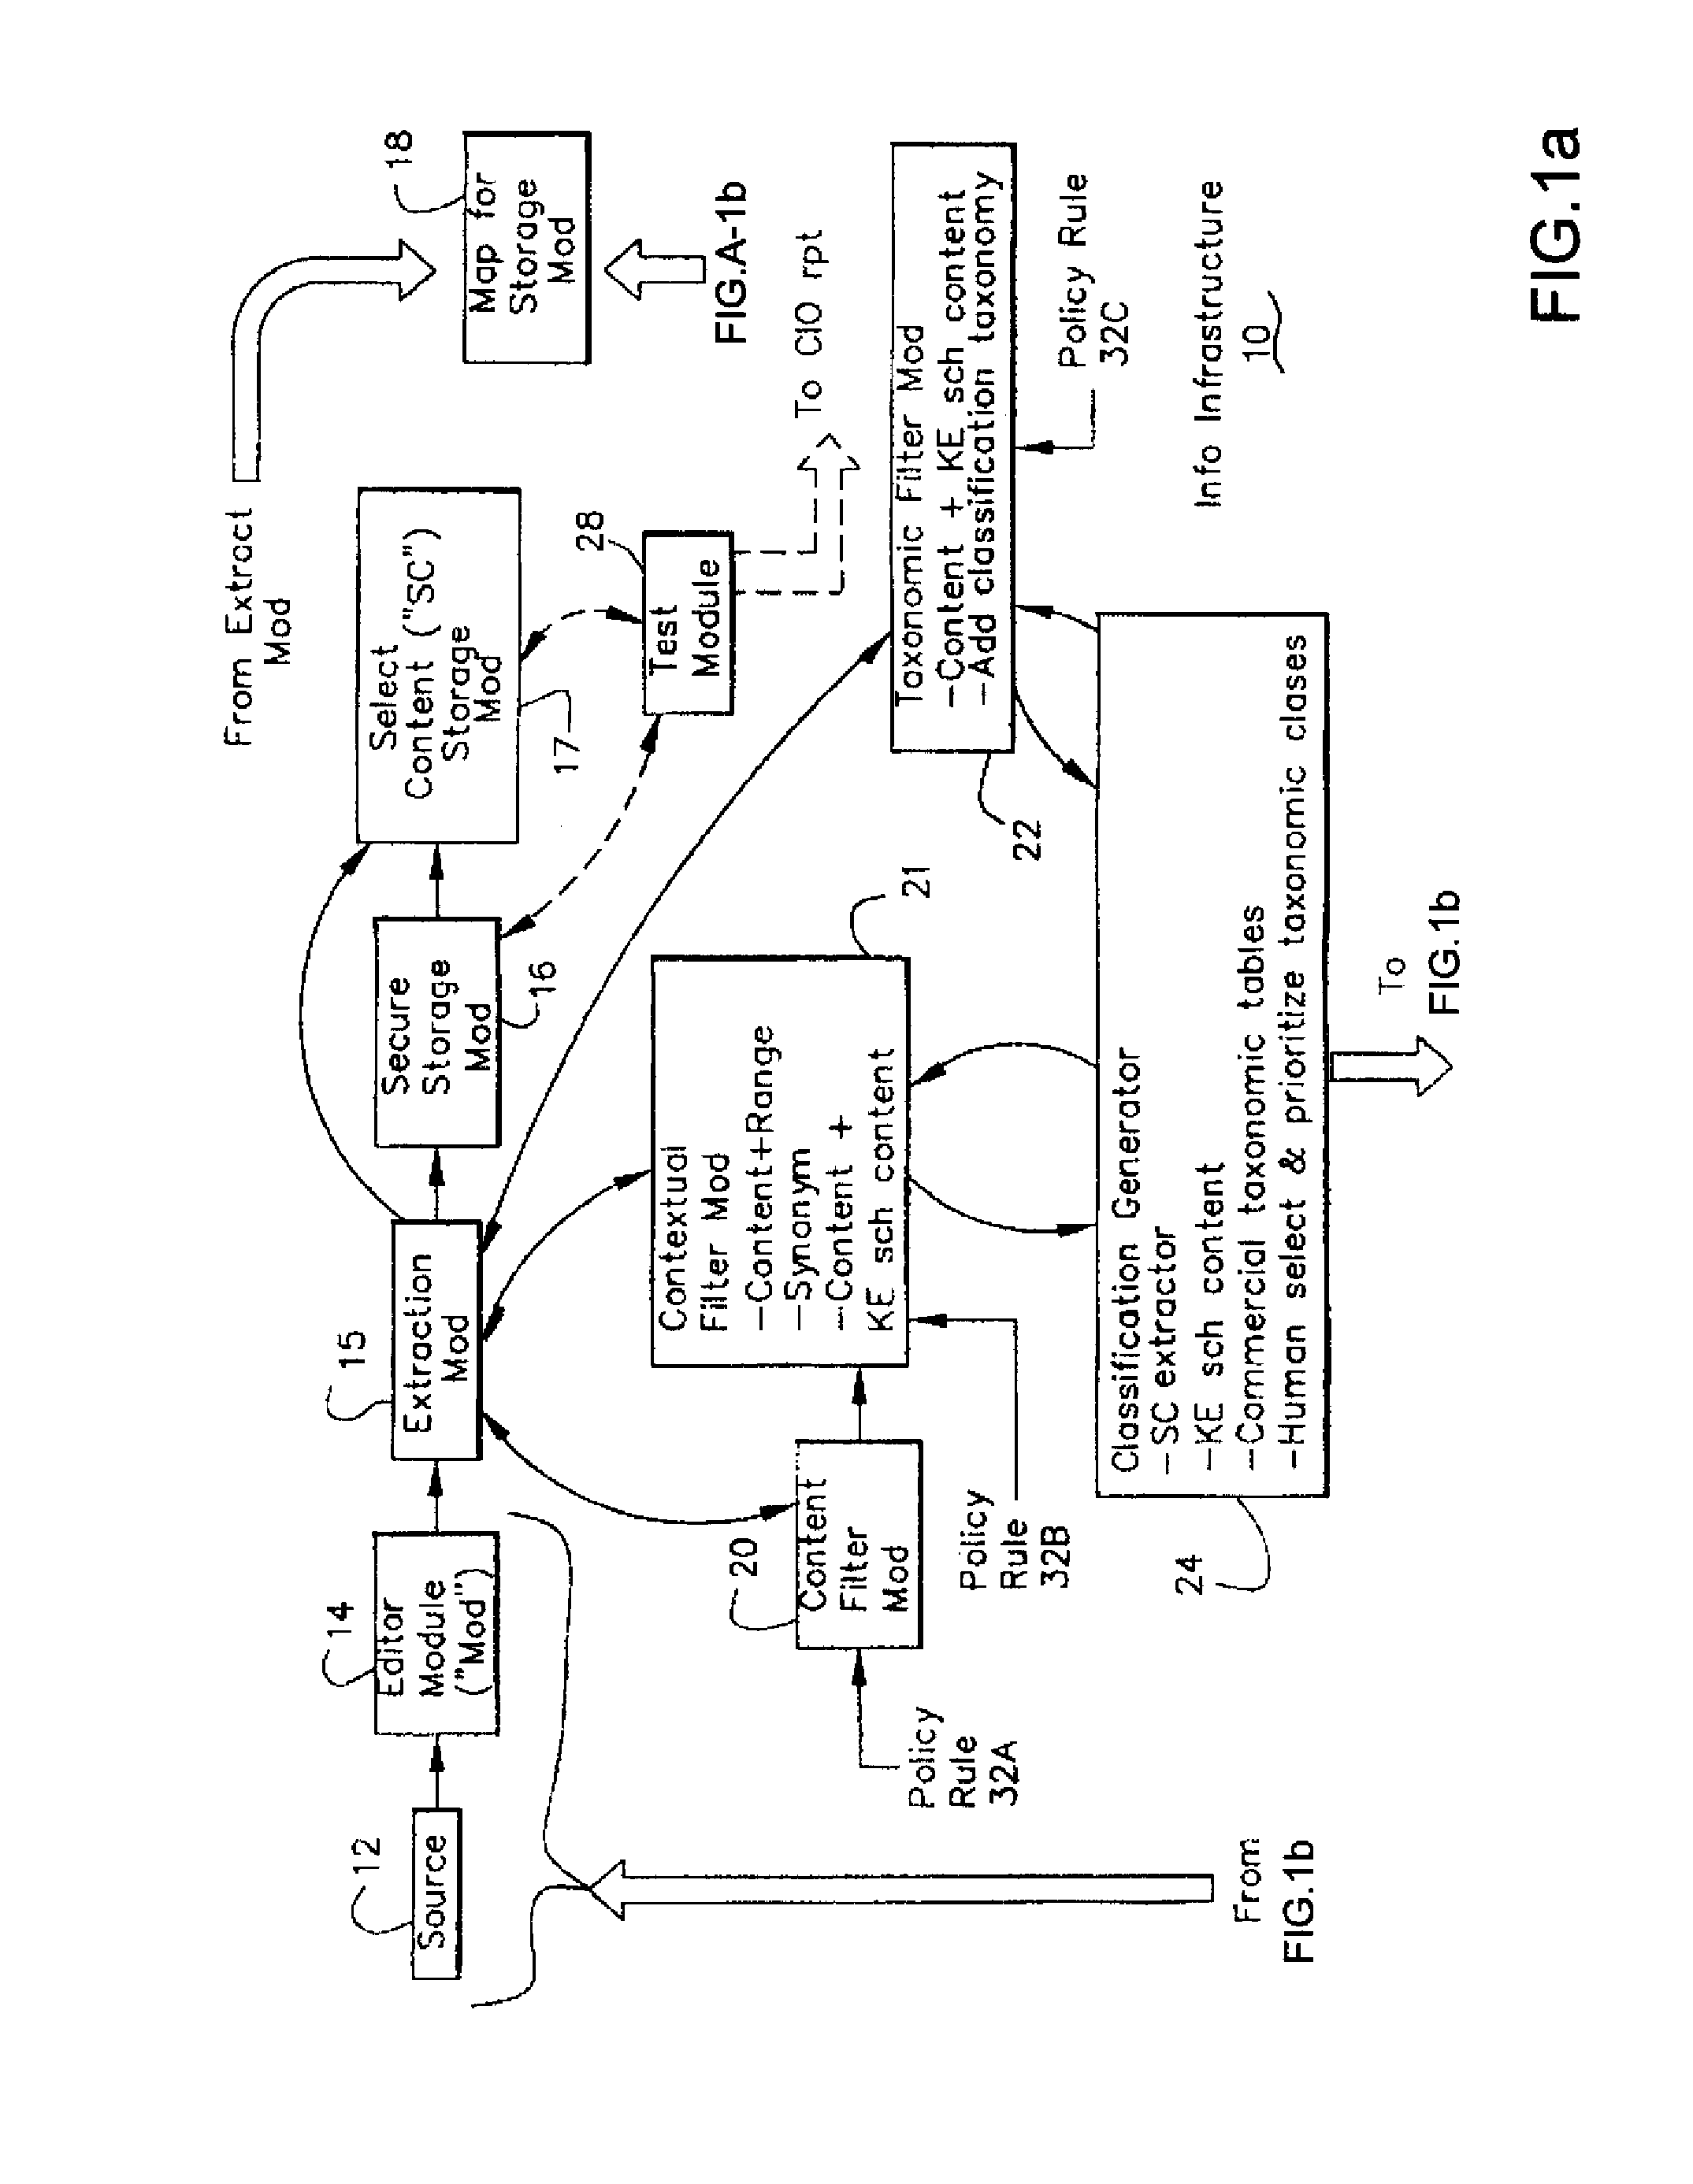 Information infrastructure management tools with extractor, secure storage, content analysis and classification and method therefor